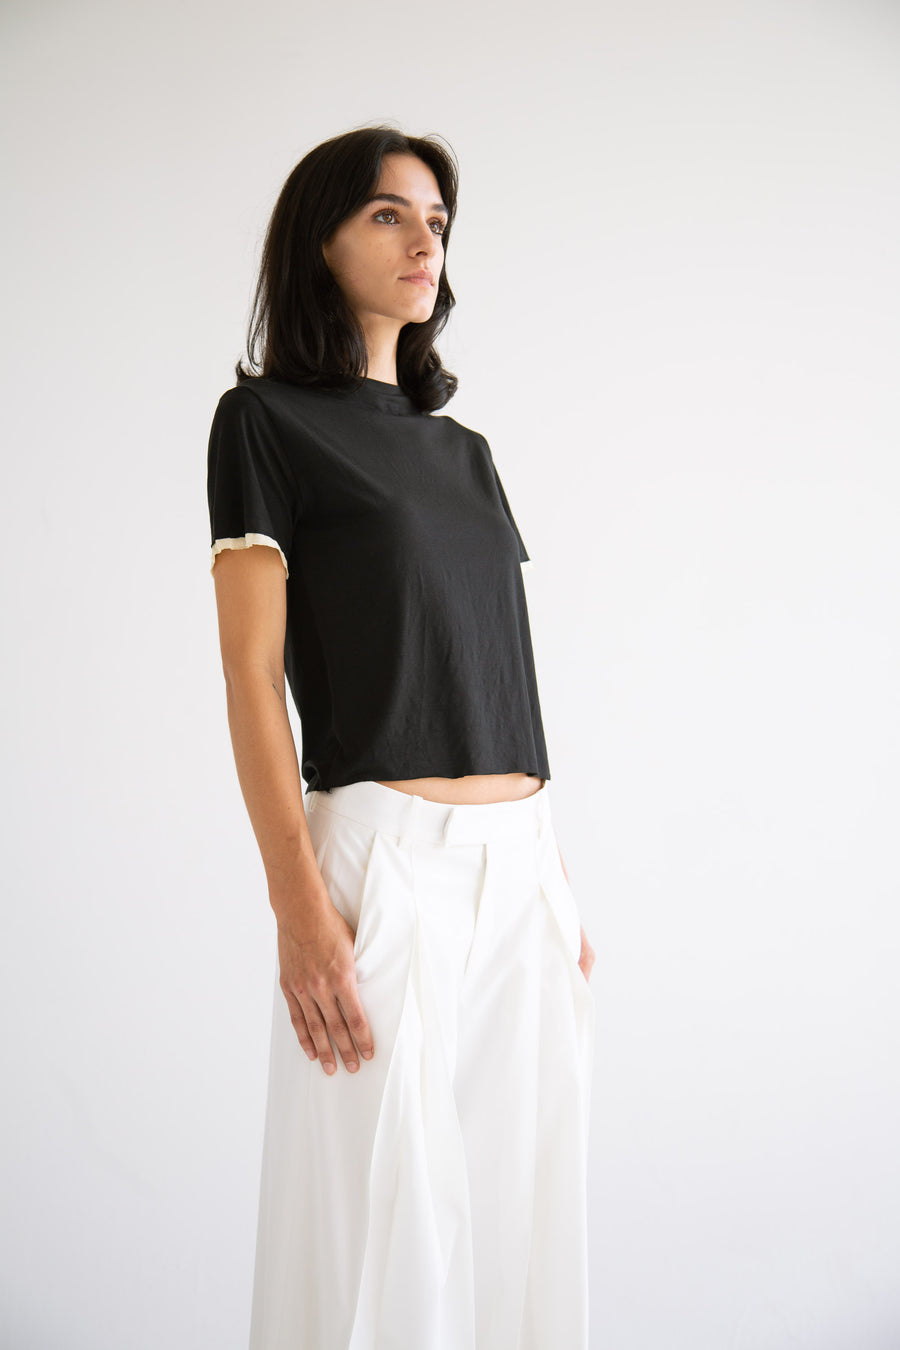 Contrast T-Shirt in Black